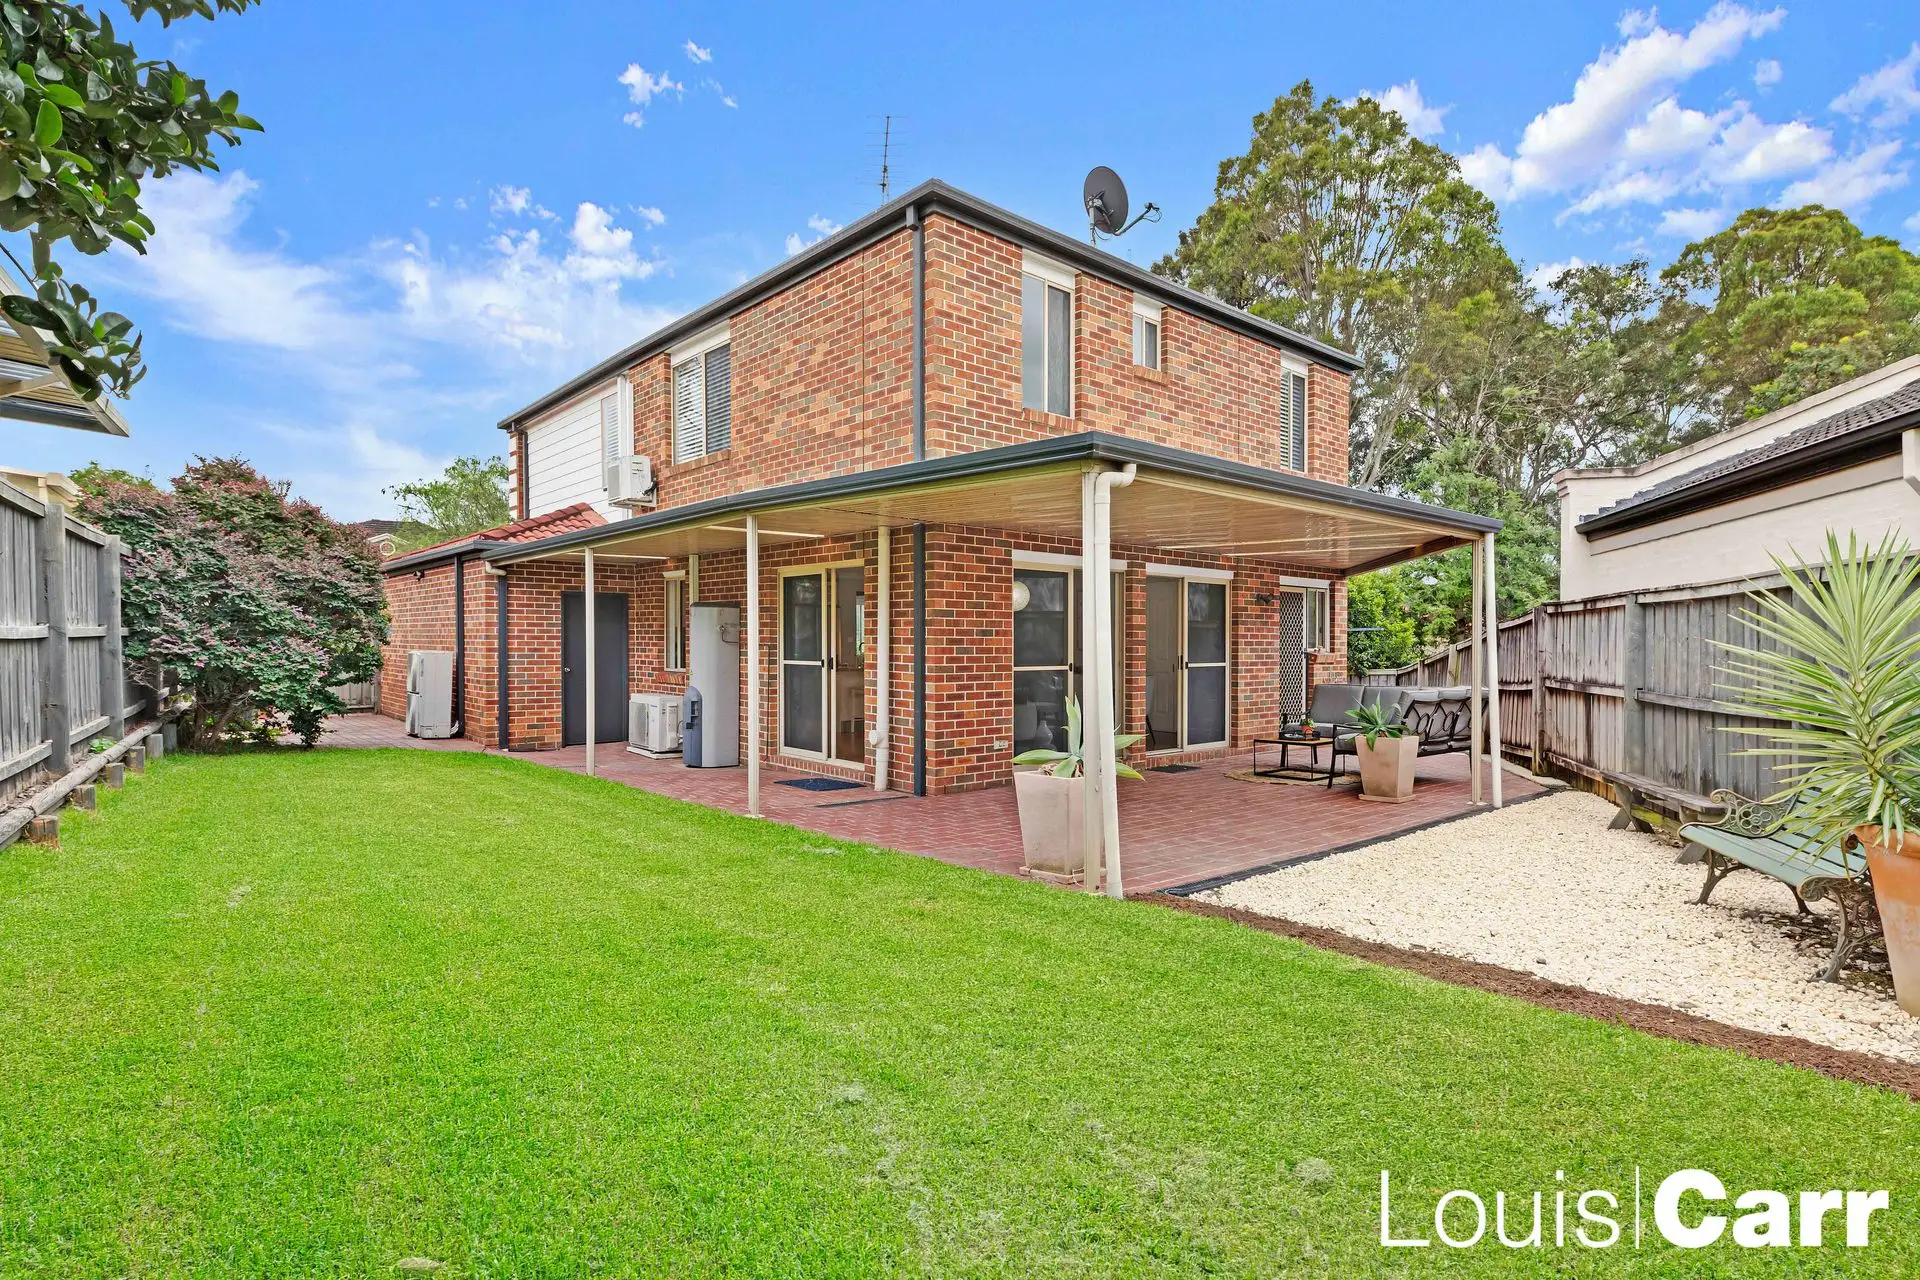 Photo #13: 7 Borrowdale Way, Beaumont Hills - Sold by Louis Carr Real Estate